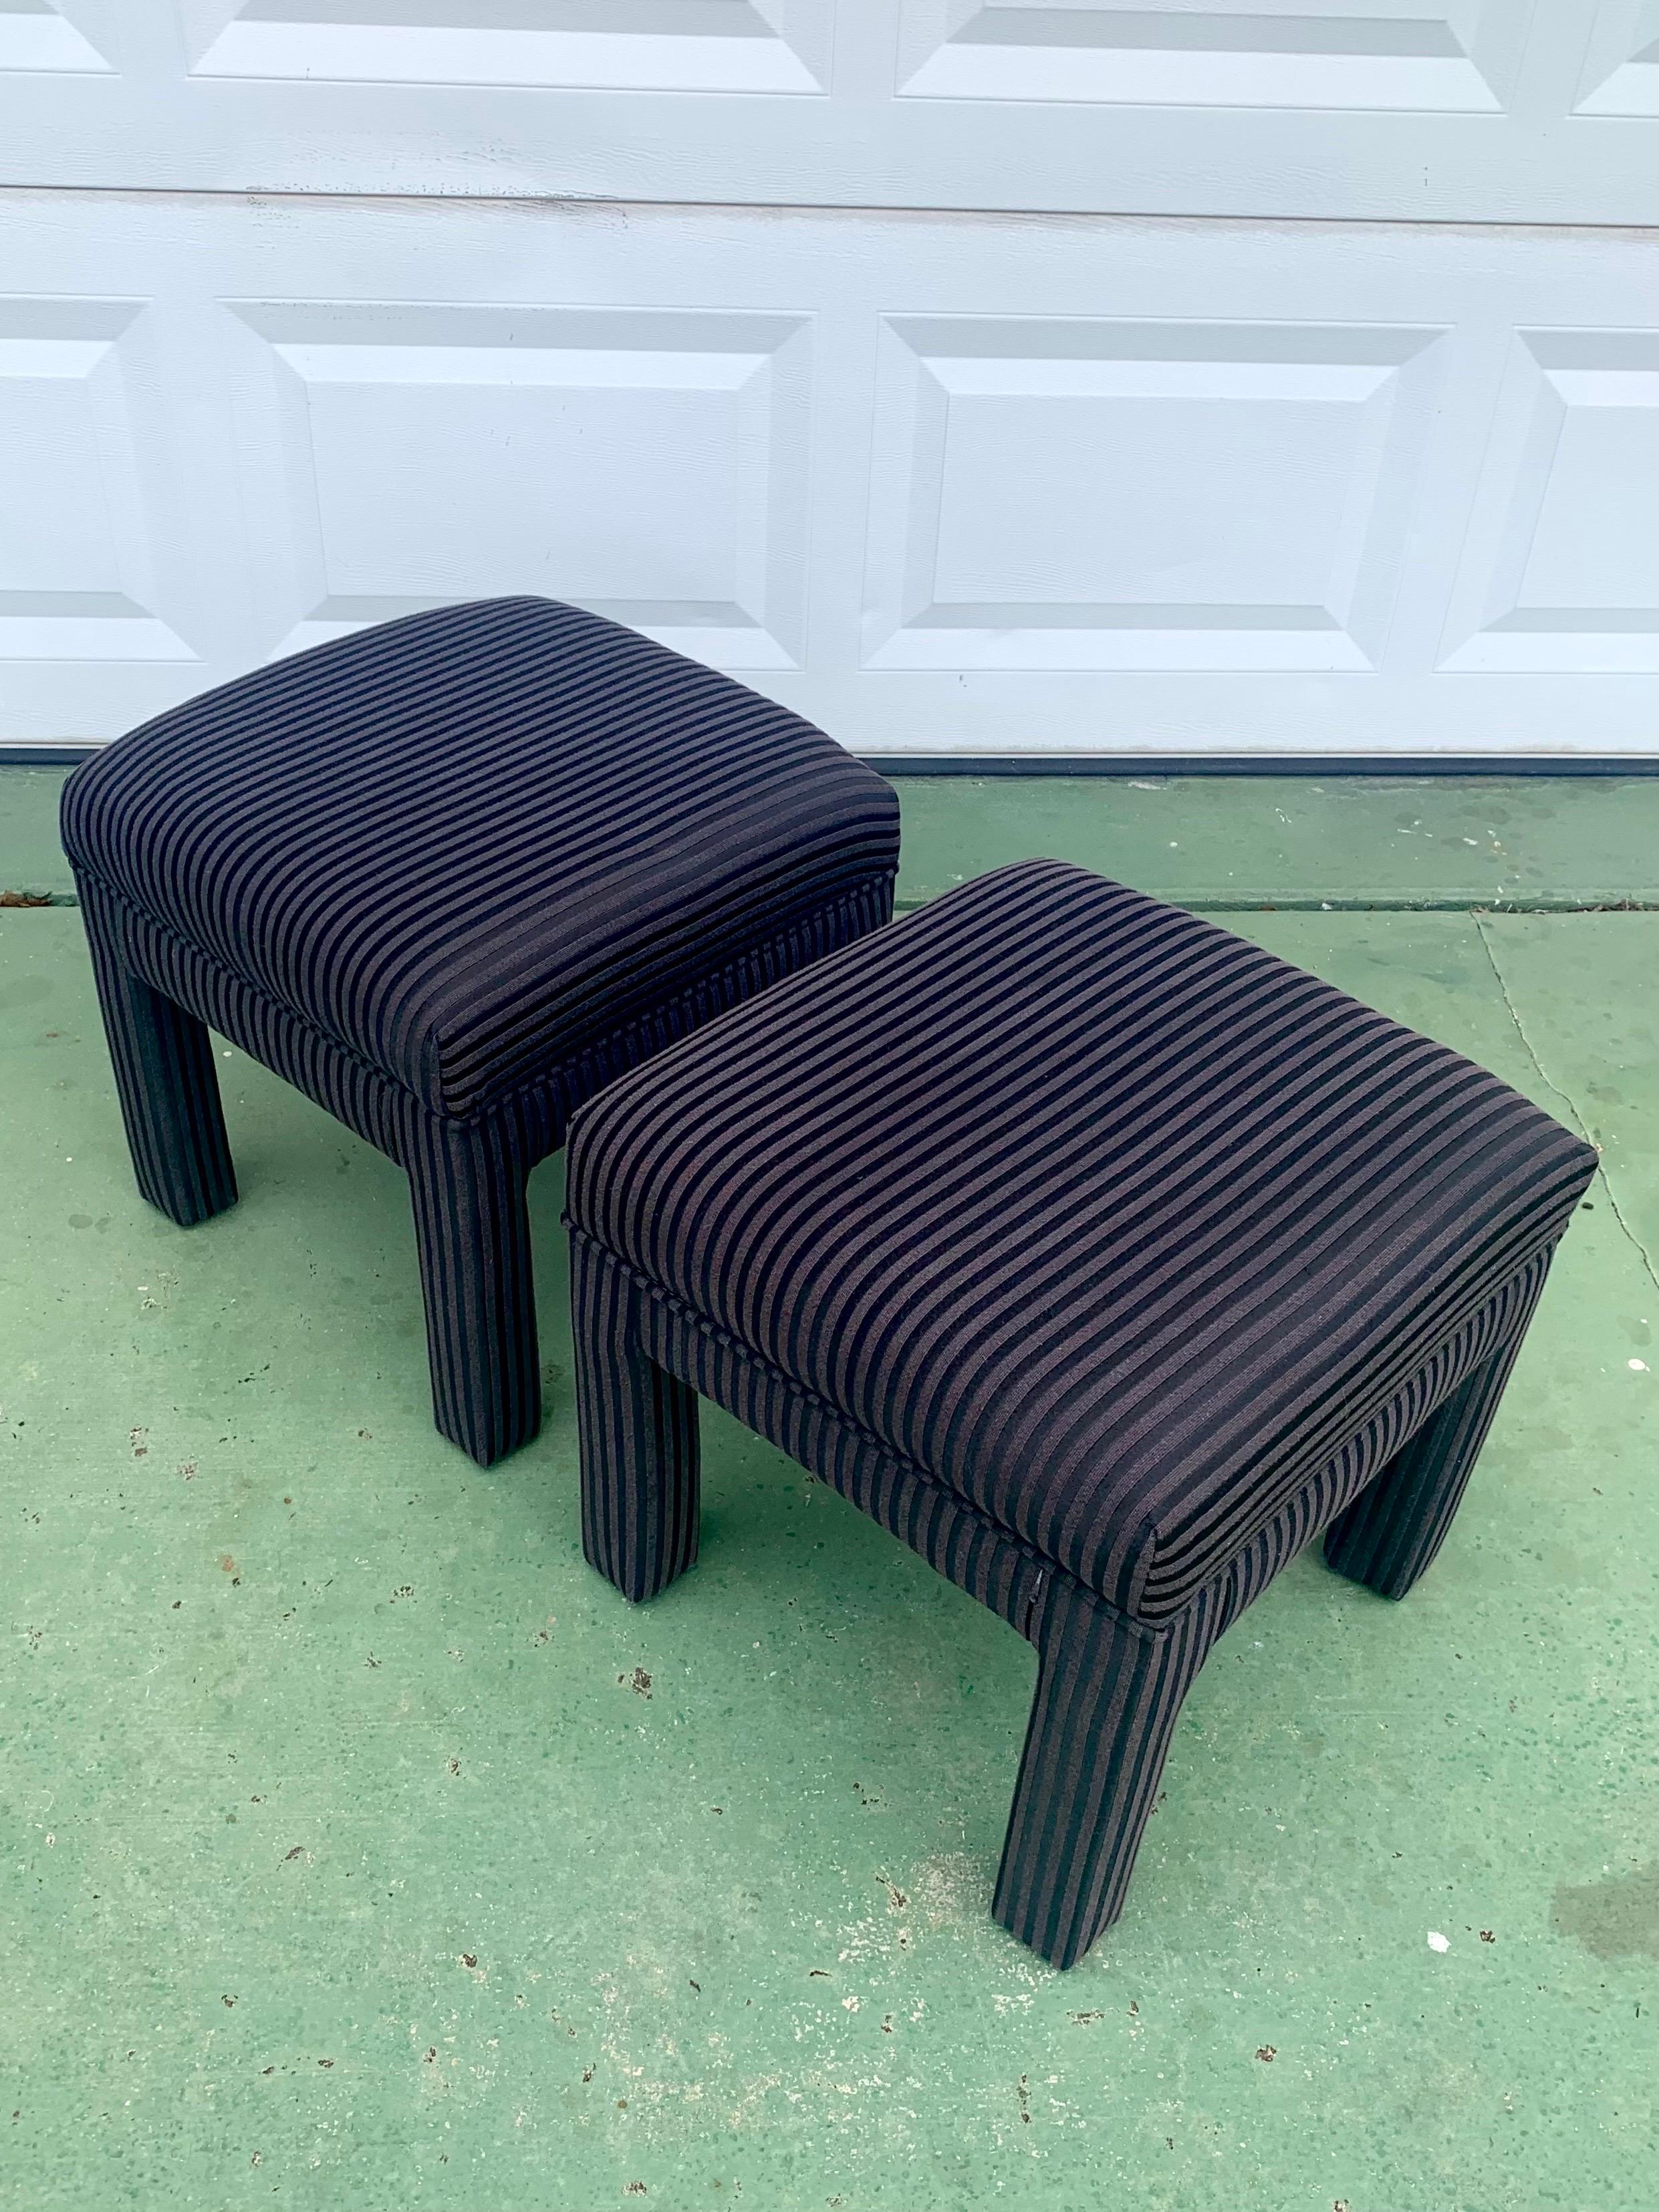 Pair of vintage Parsons style stools. Upholstery and structure remain in great condition. Upholstery is a striking mix of black and grey stripes. One single instance of separation in the upholstery. Otherwise I’m great vintage condition. 

They